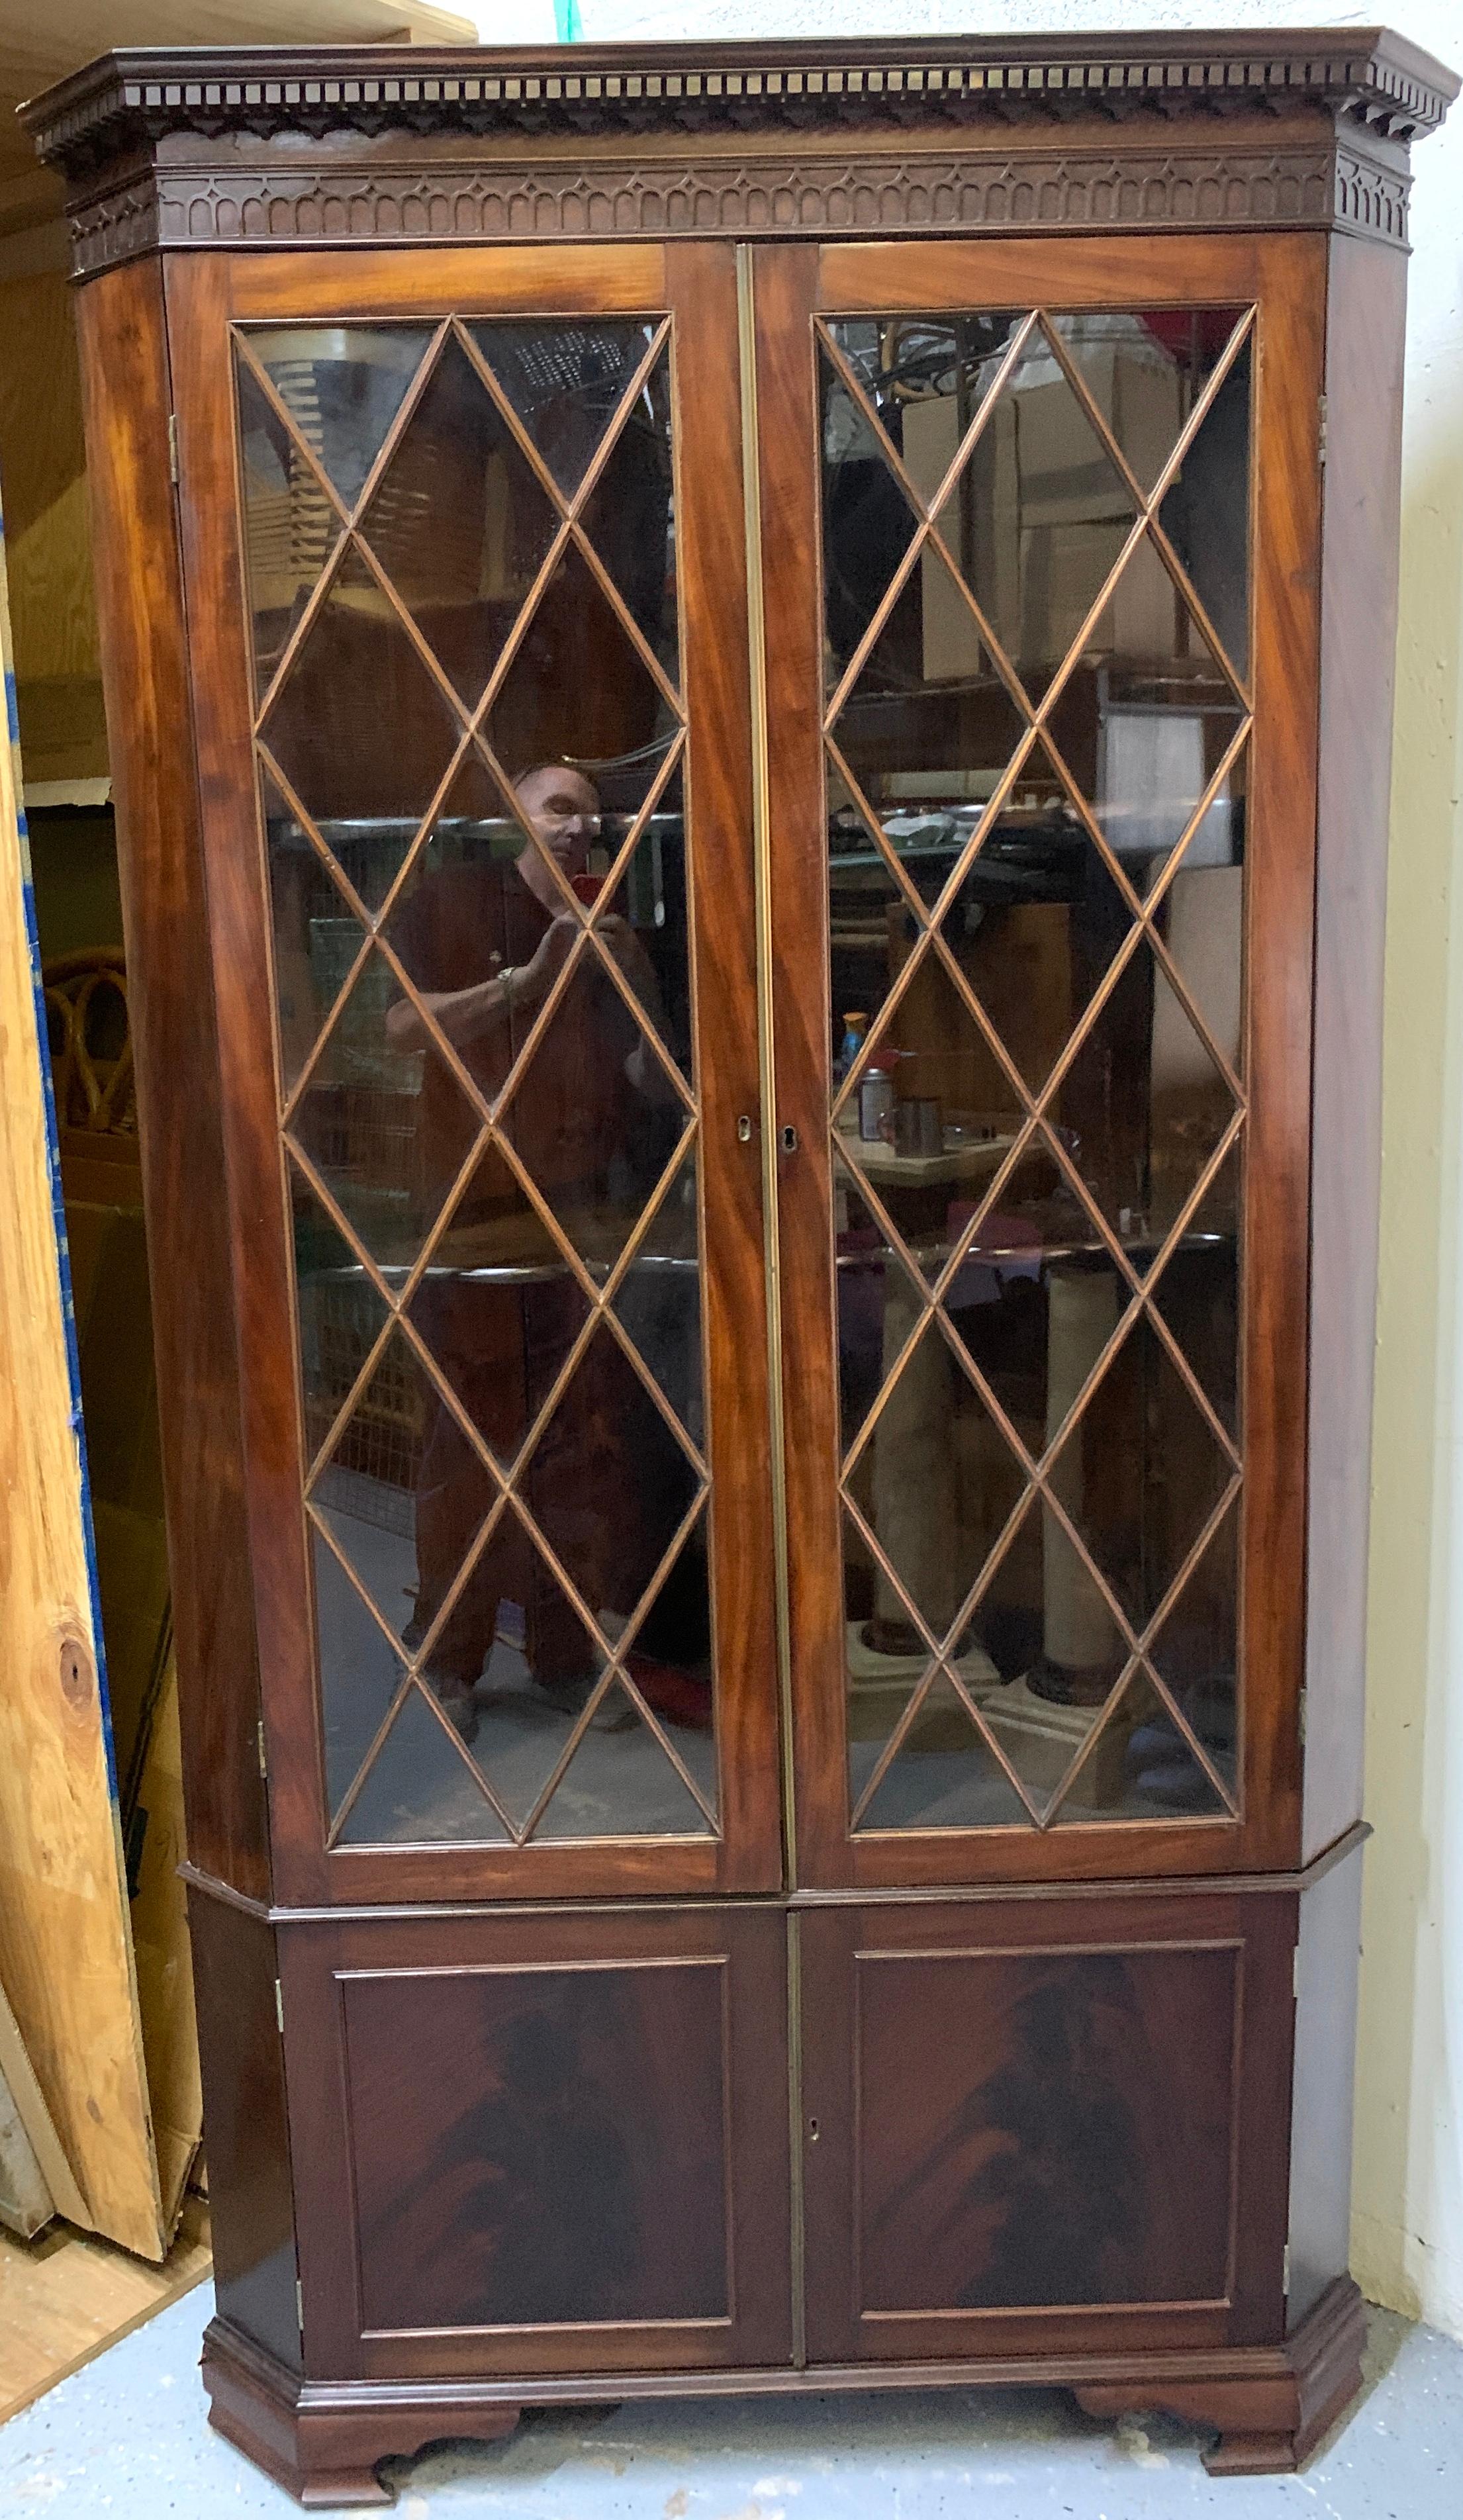 Fine George III mahogany corner cupboard, with fine dental molding with subtle Gothic frieze cornice. Fitted with two diamond patterned mullion glazed doors, the interior with two shelves. The lower part with two paneled doors, raised on bracket